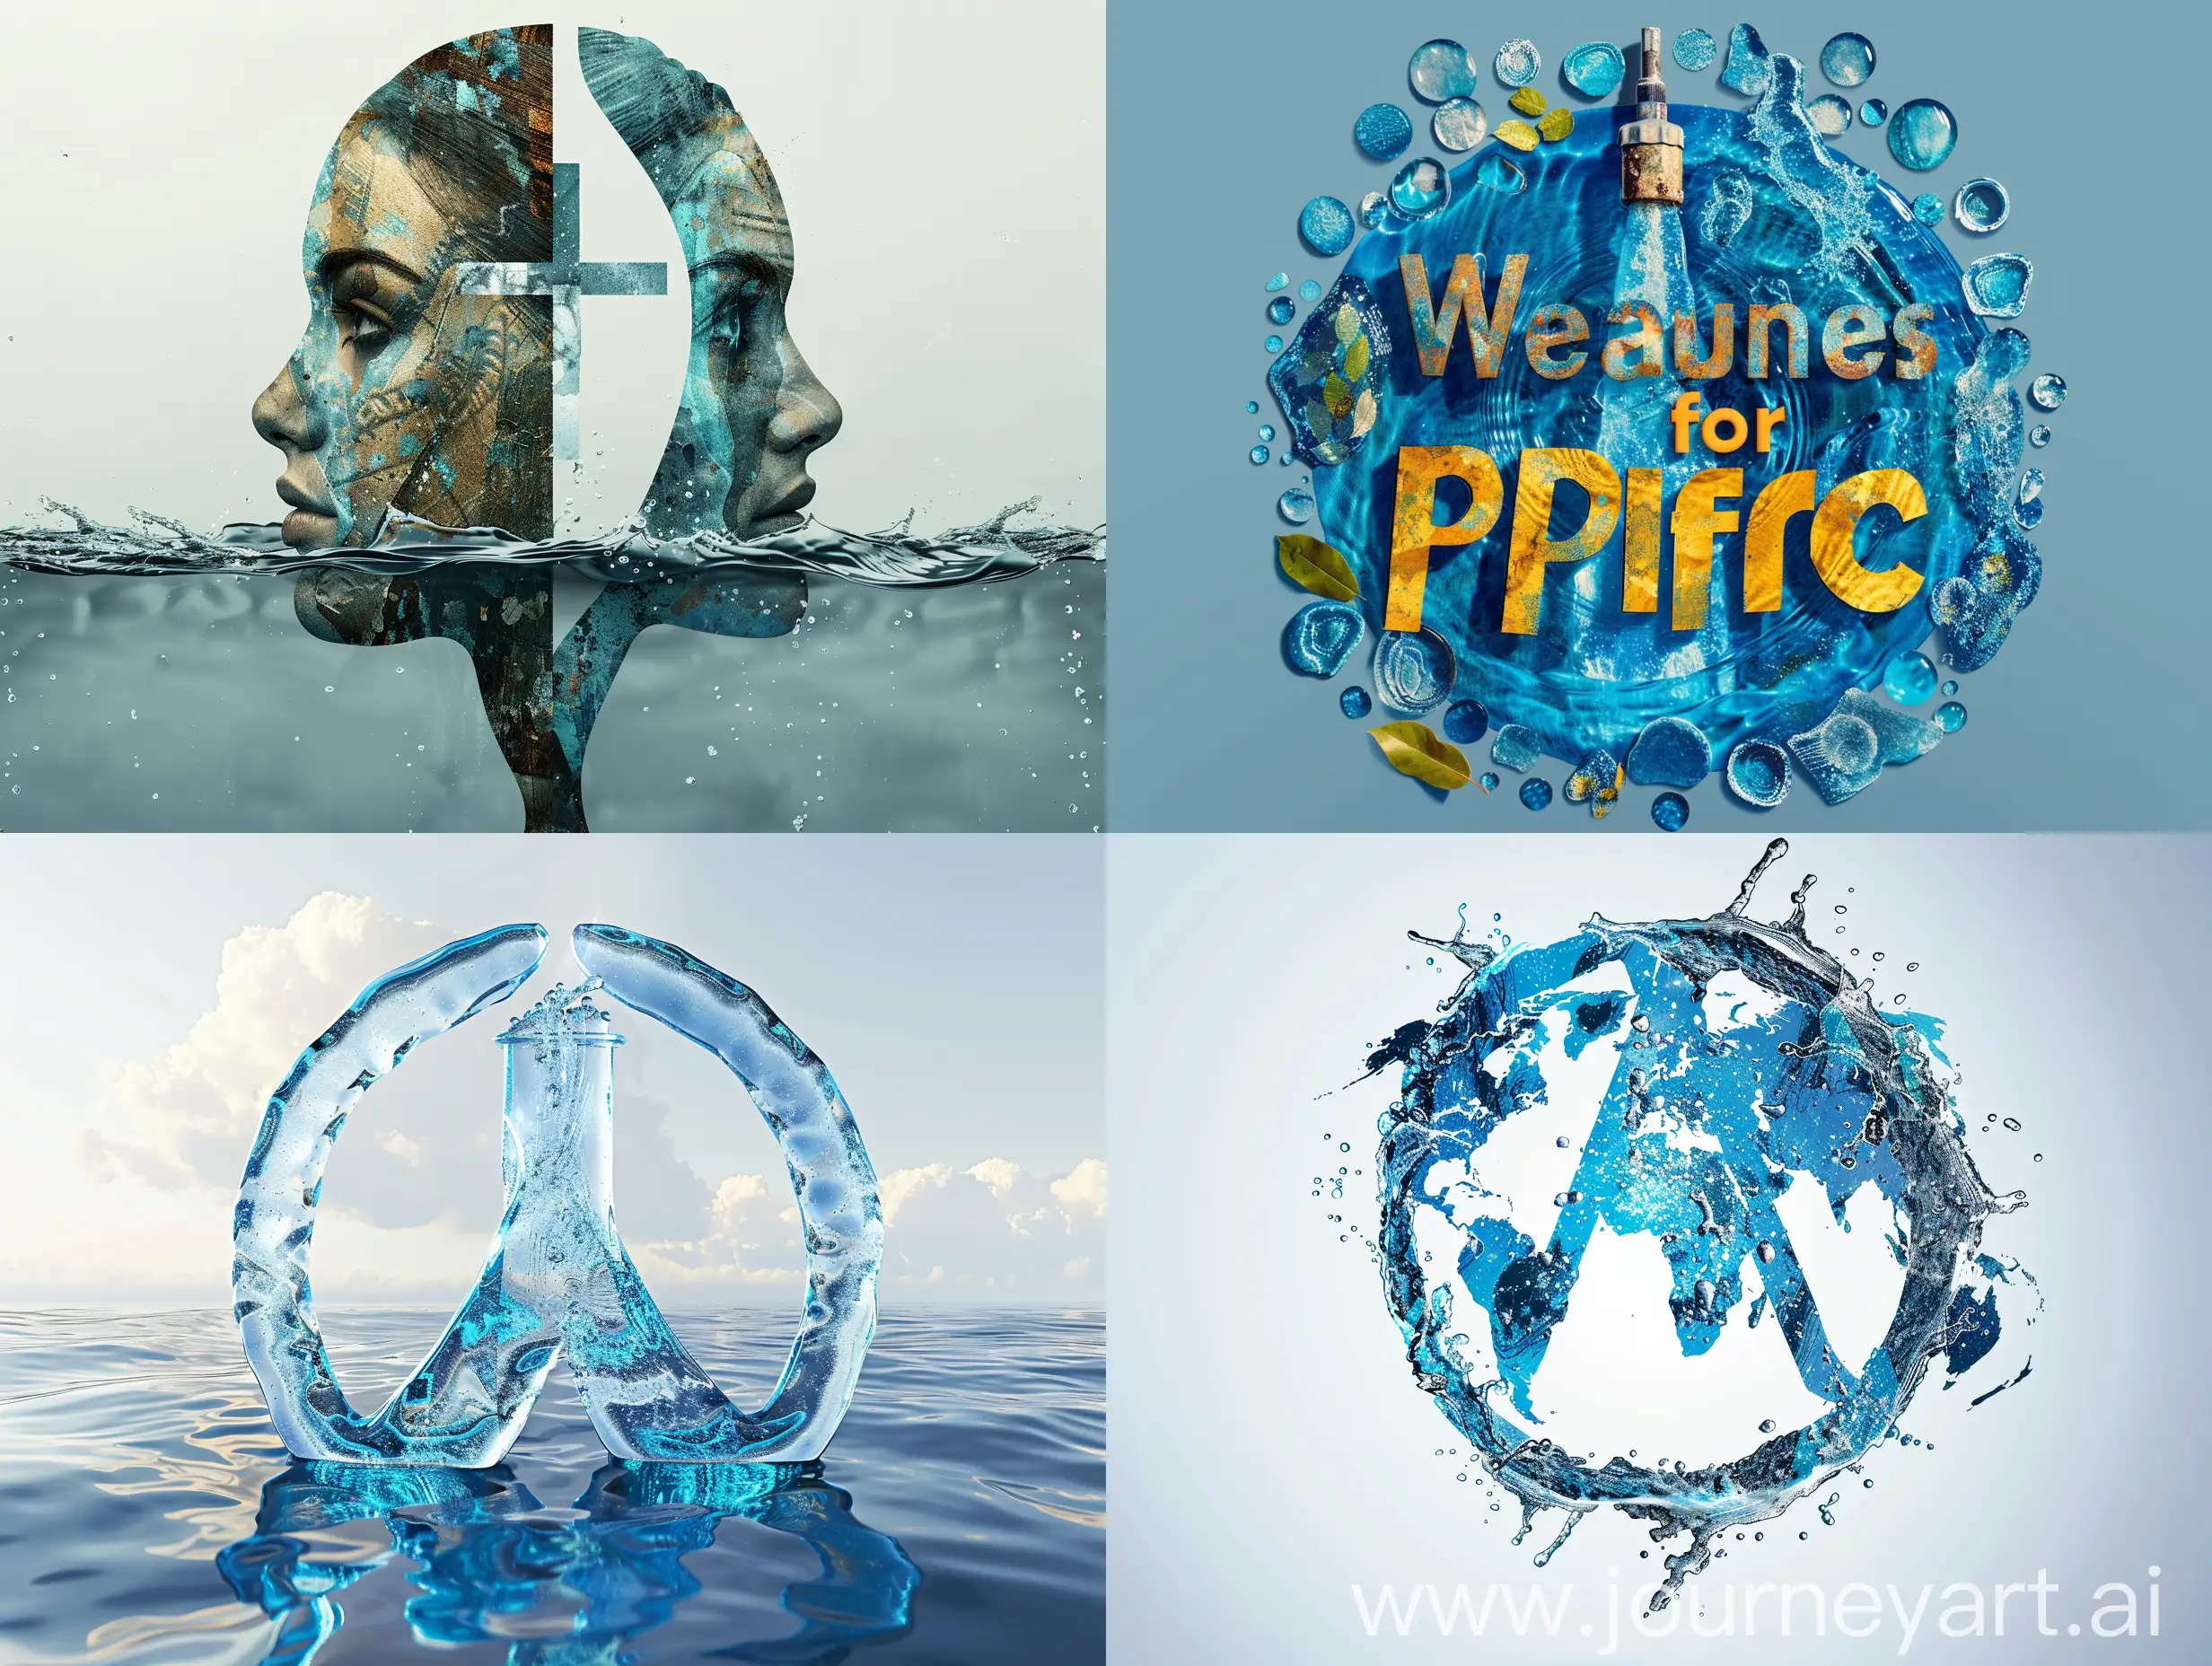 reseach poster on theme water for peace